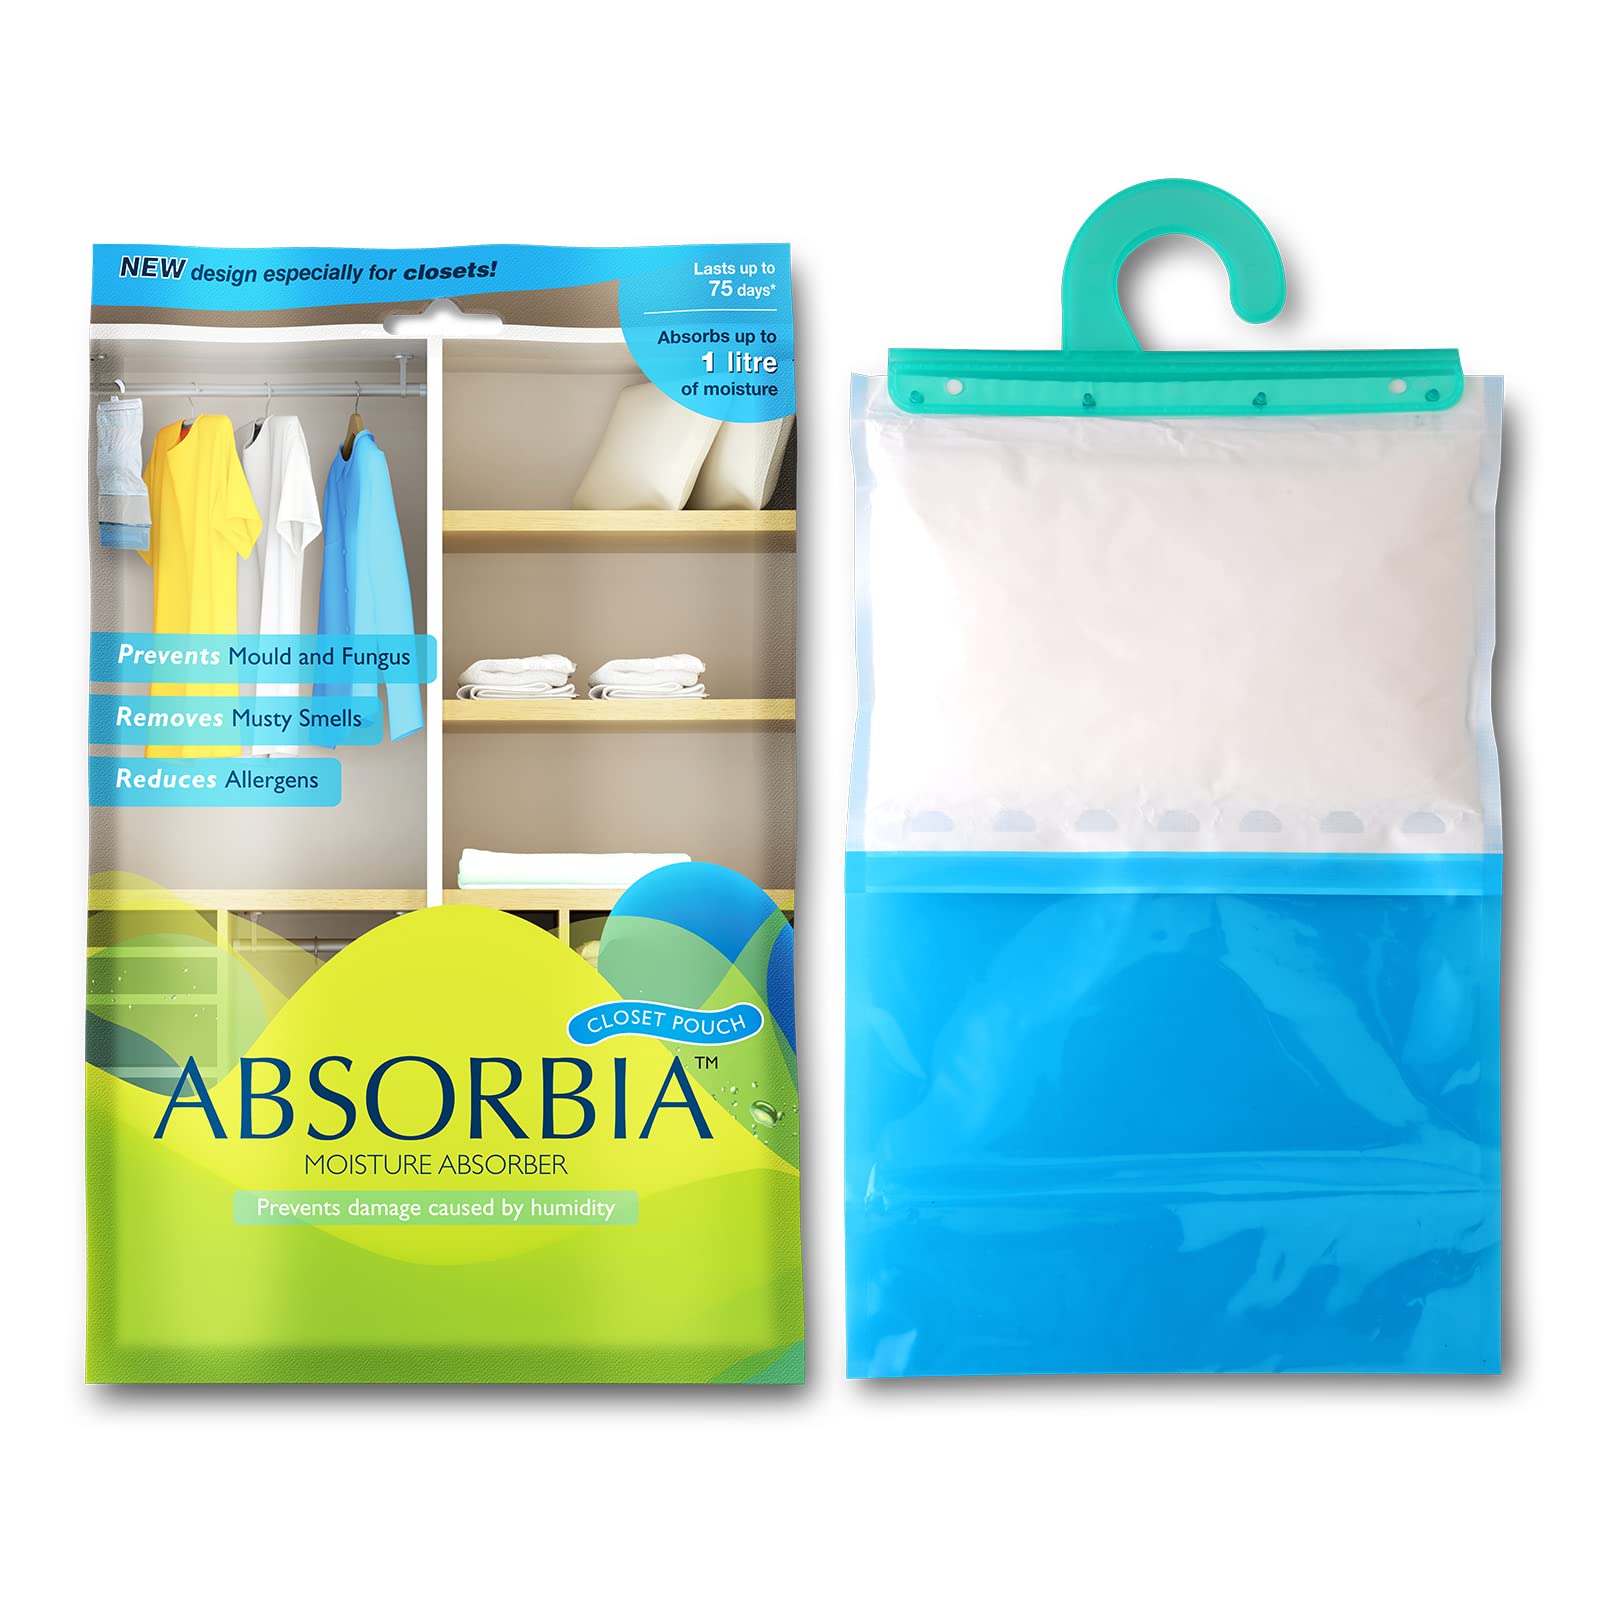 Absorbia Moisture Absorber| Absorbia Hanging Pouch - Family Pack of 9 (880ml Each) | Dehumidifier for Wardrobe, Closet and Bathroom| Fights Against Moisture, Mould, Fungus Musty Smells…